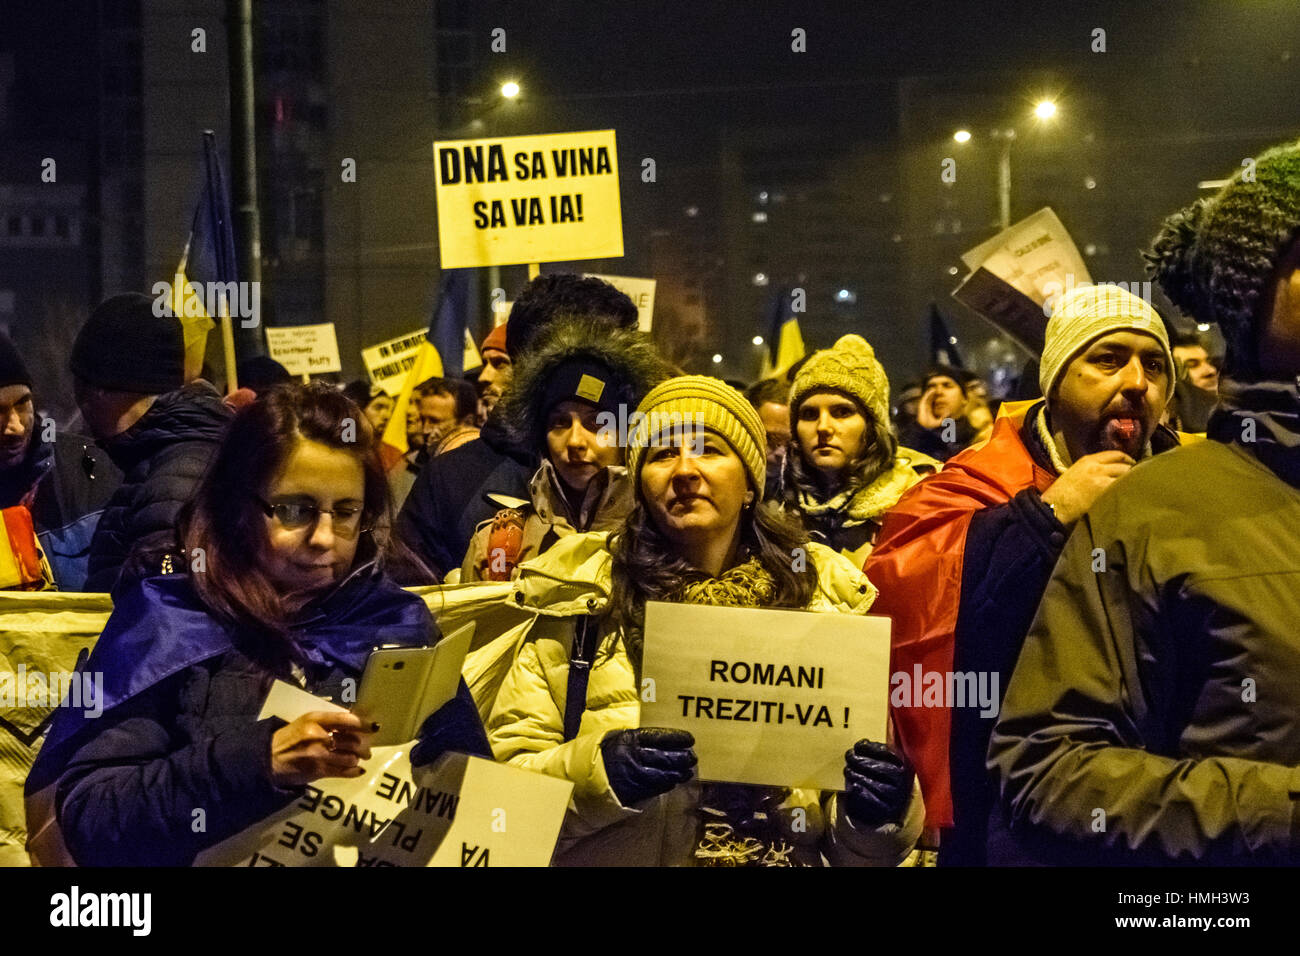 Brasov, Romania. 3rd February, 2017. People protesting against the decision of prisoner pardon especially for corruption. Credit: Ionut David/Alamy Live News Stock Photo